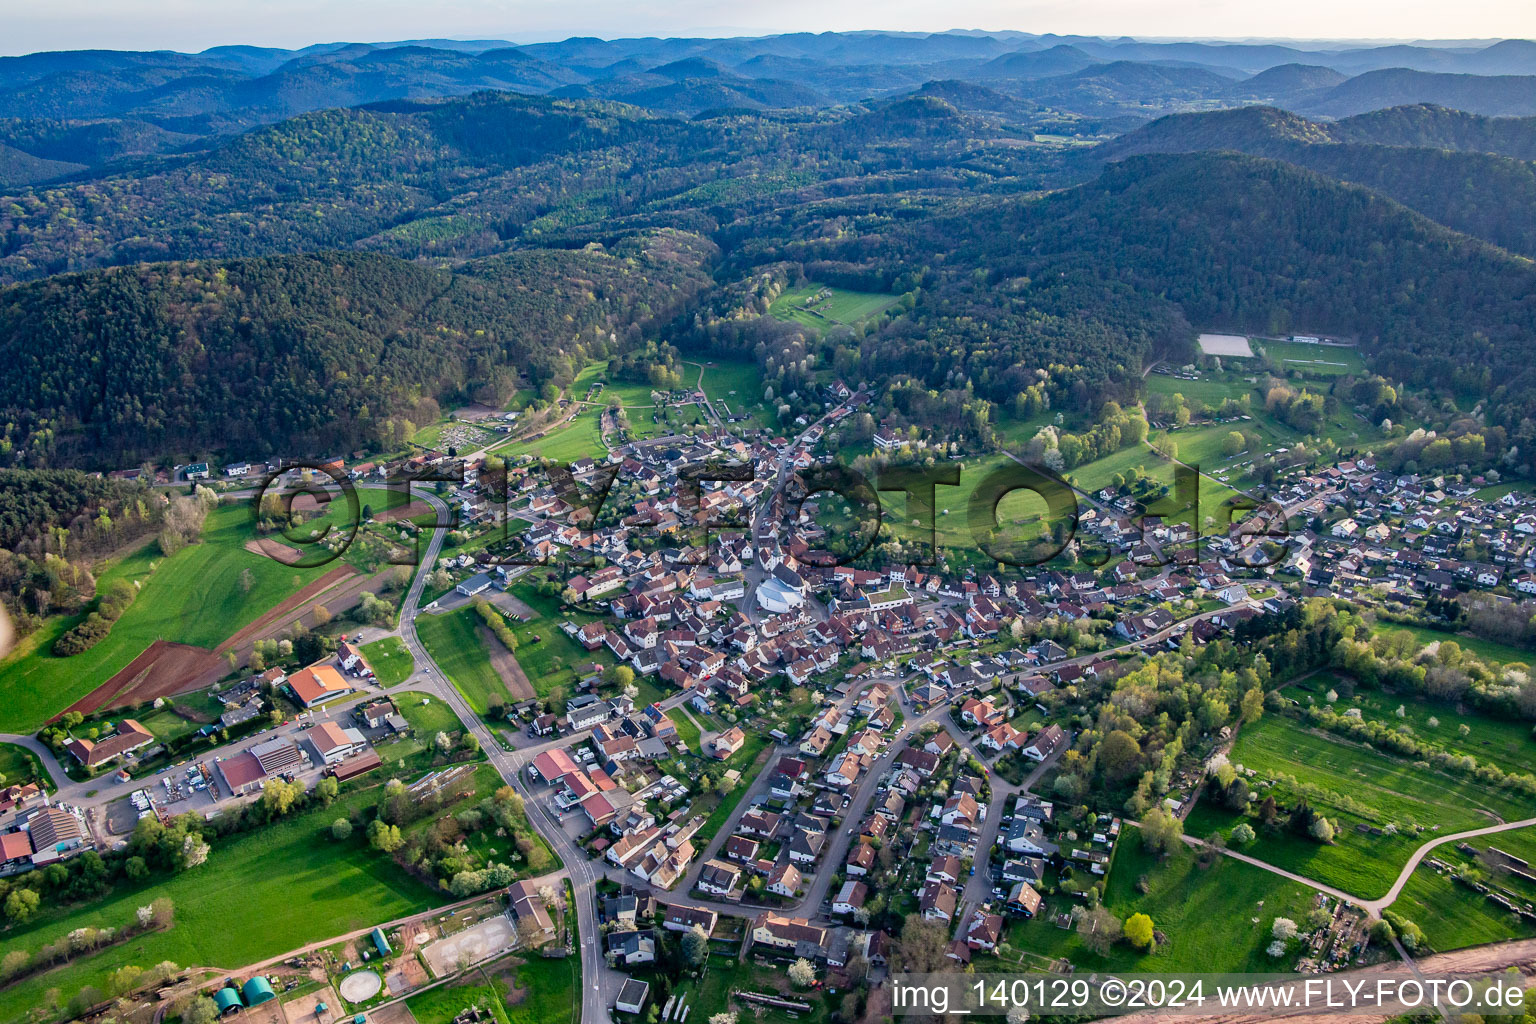 District Gossersweiler in Gossersweiler-Stein in the state Rhineland-Palatinate, Germany from a drone